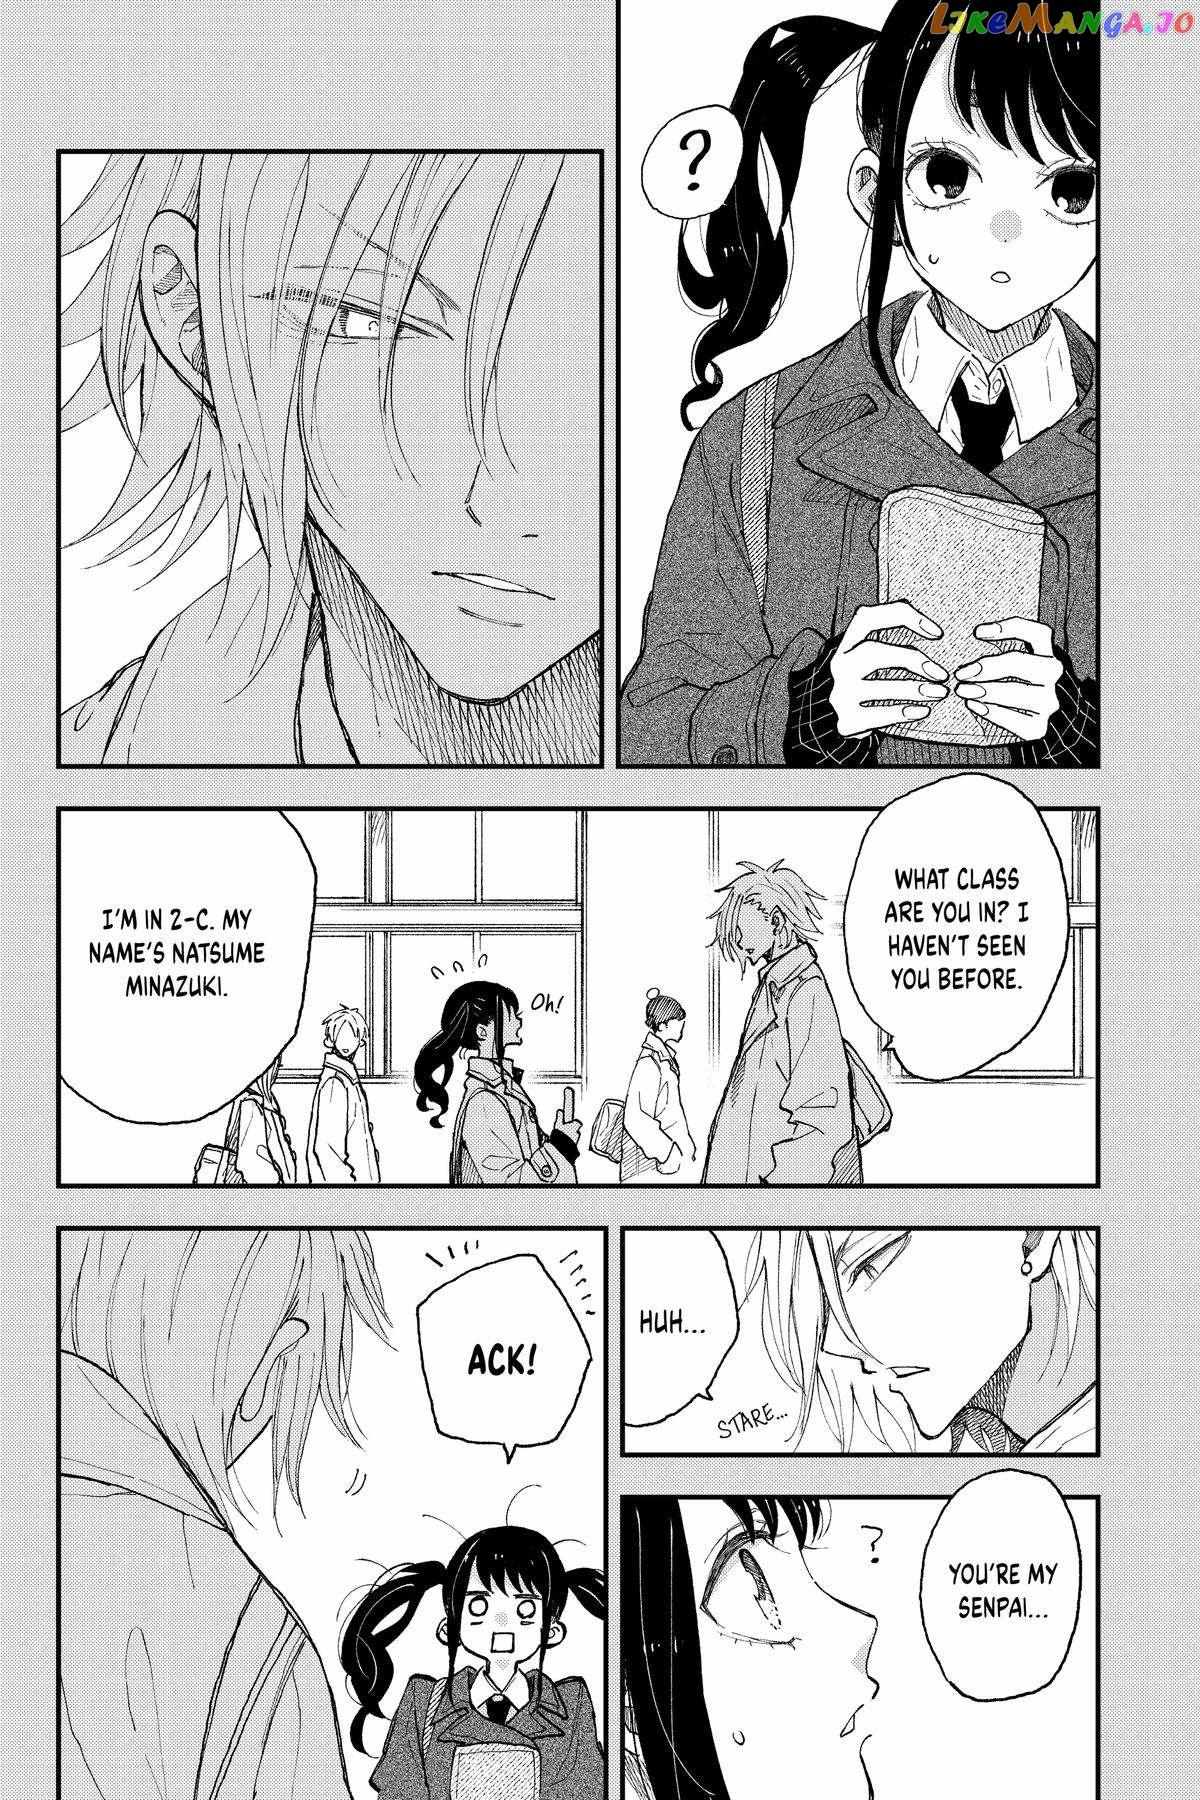 Natsume To Natsume - 29 page 10-7013997d